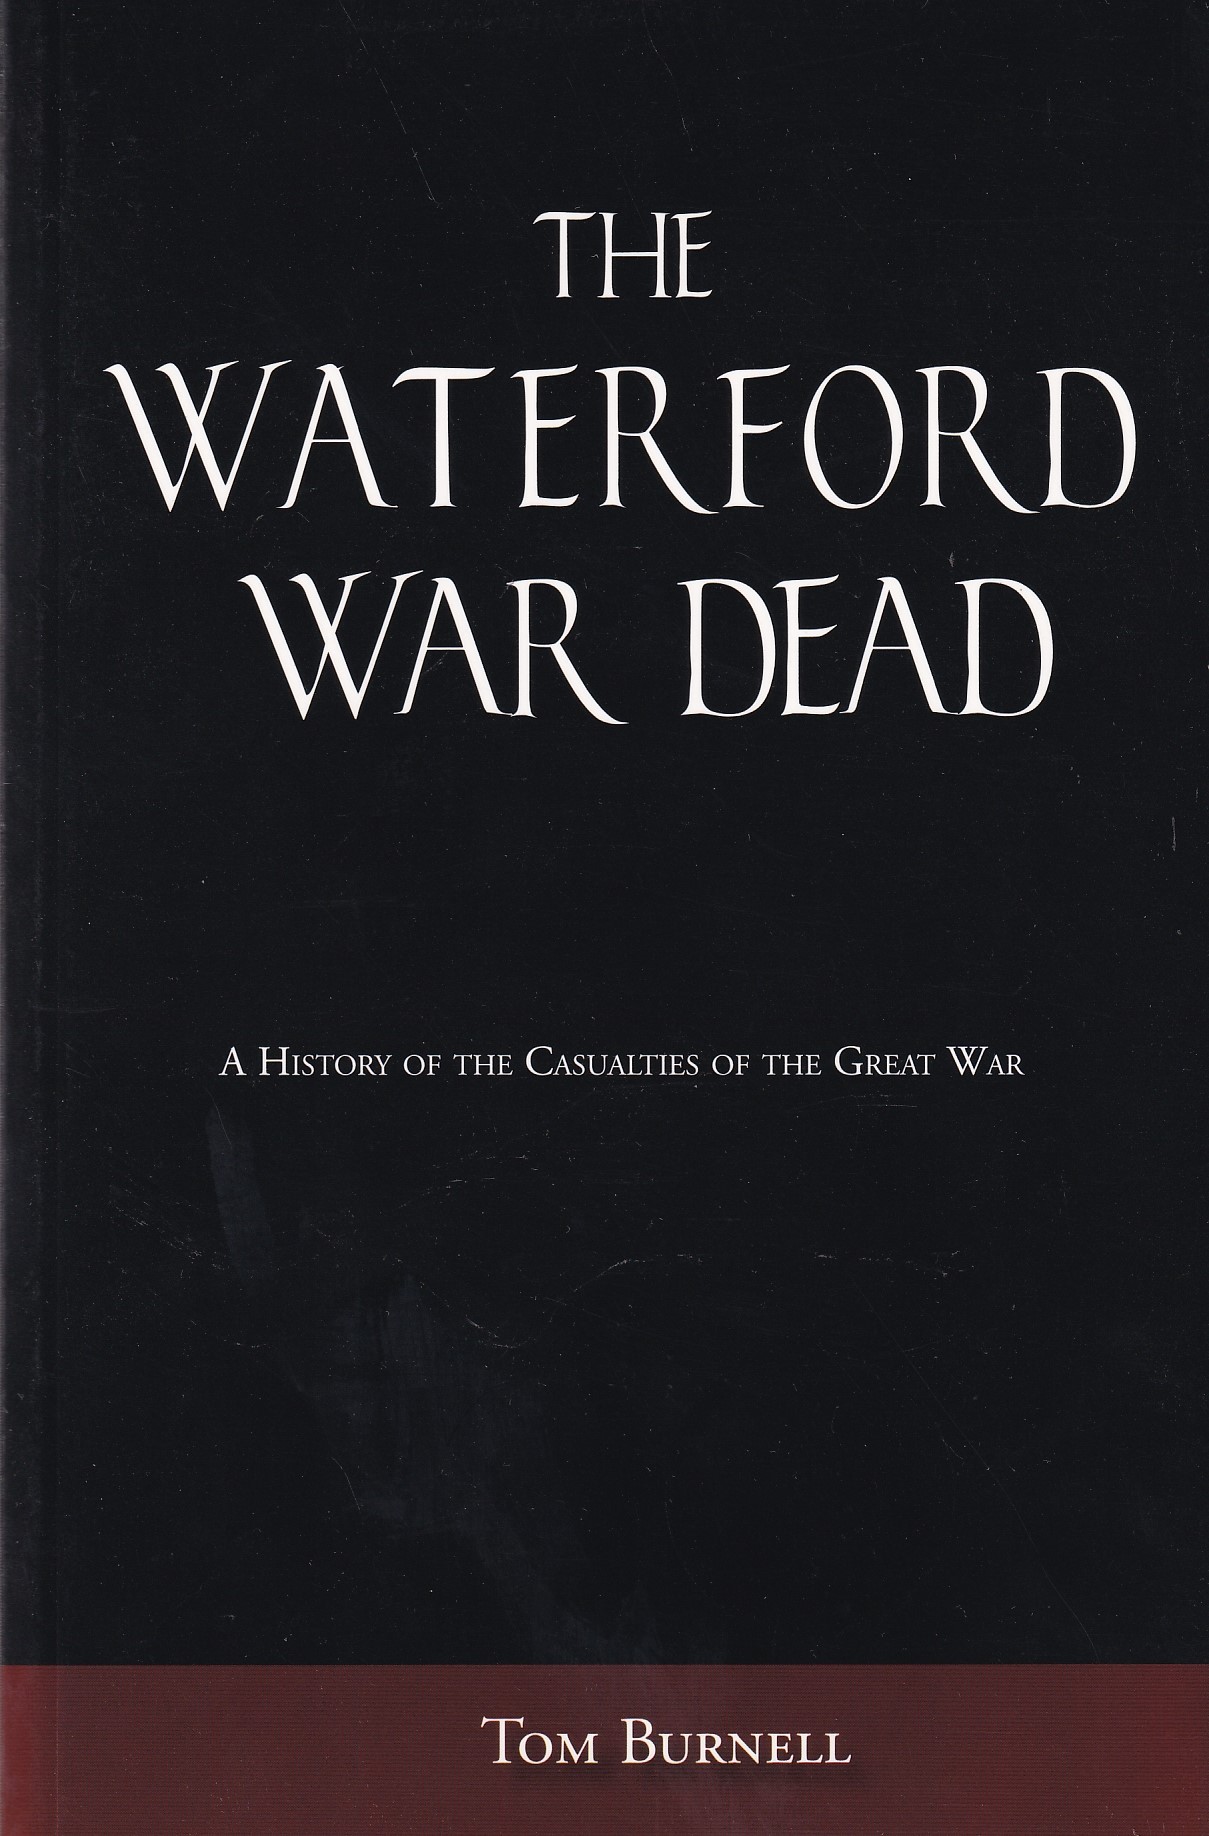 The Waterford War Dead: A History of the Casualties of the Great War by Tom Burnell